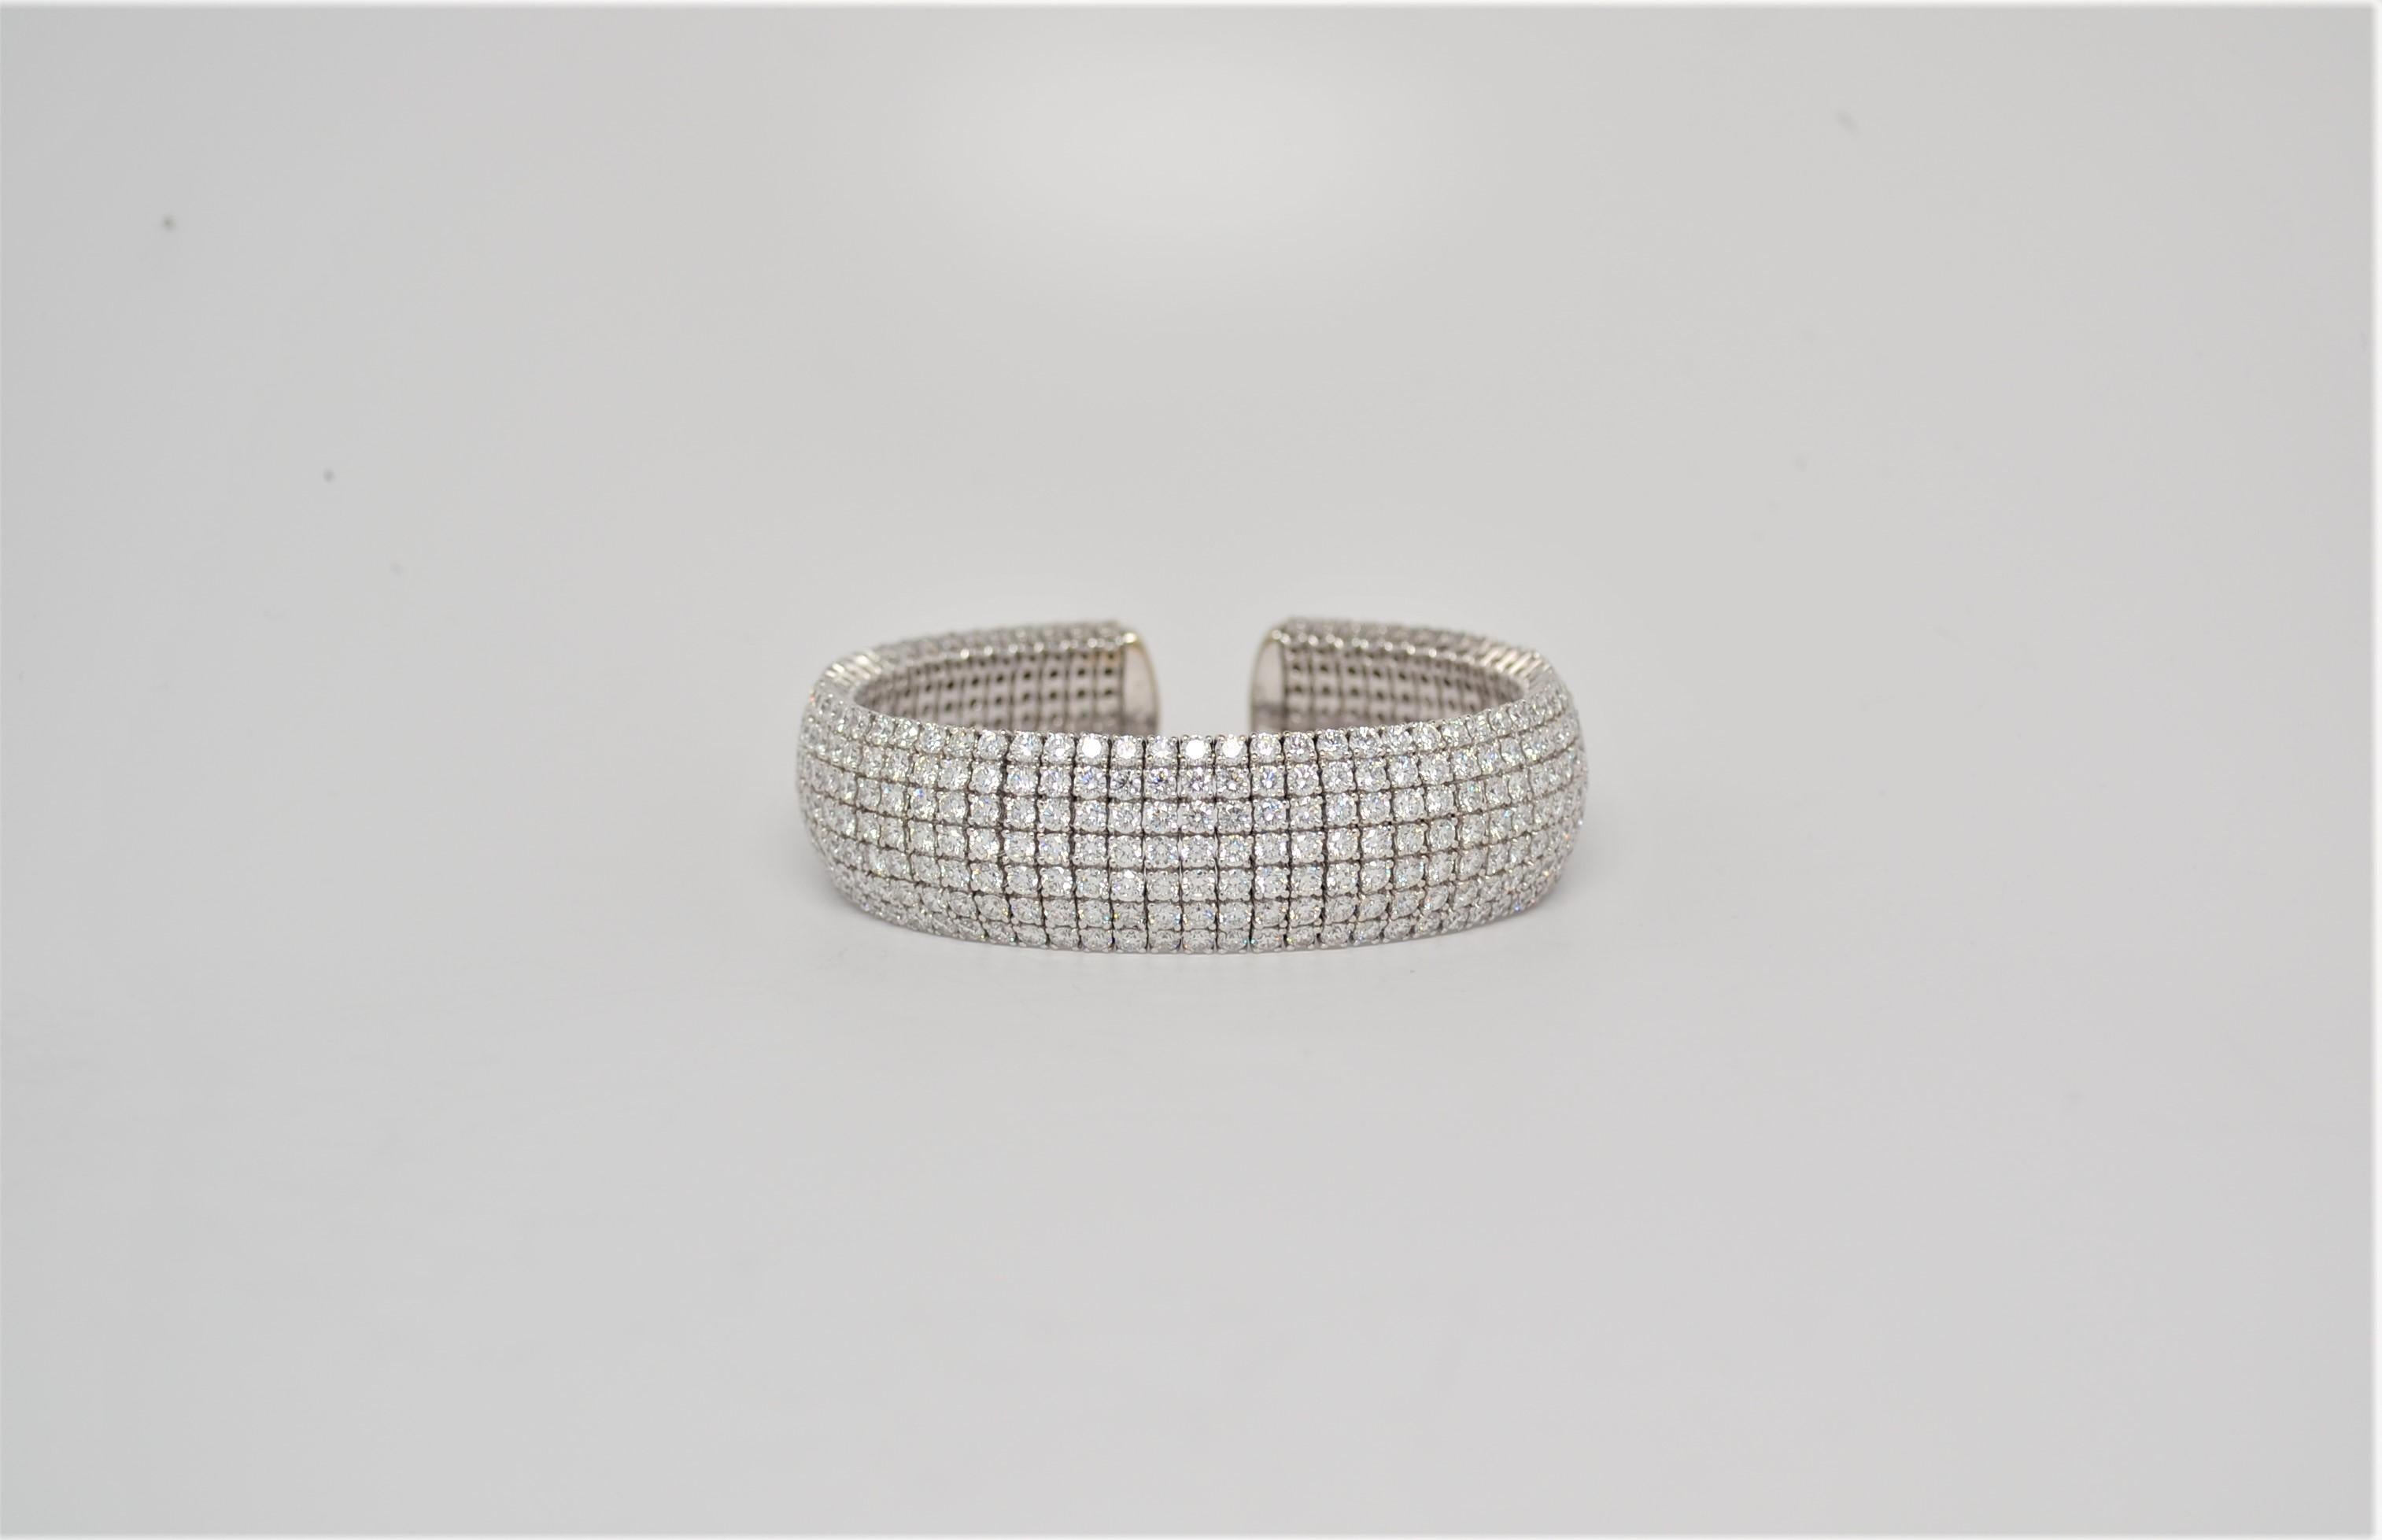 A unique ladies' 18K White Gold bangle bracelet with Diamonds. The bracelet is open ended with flexible prong settings for a comfortable fit. A total of four hundred and thirty four Round Brilliant Cut Diamonds weigh 23.25ct total, color grade range